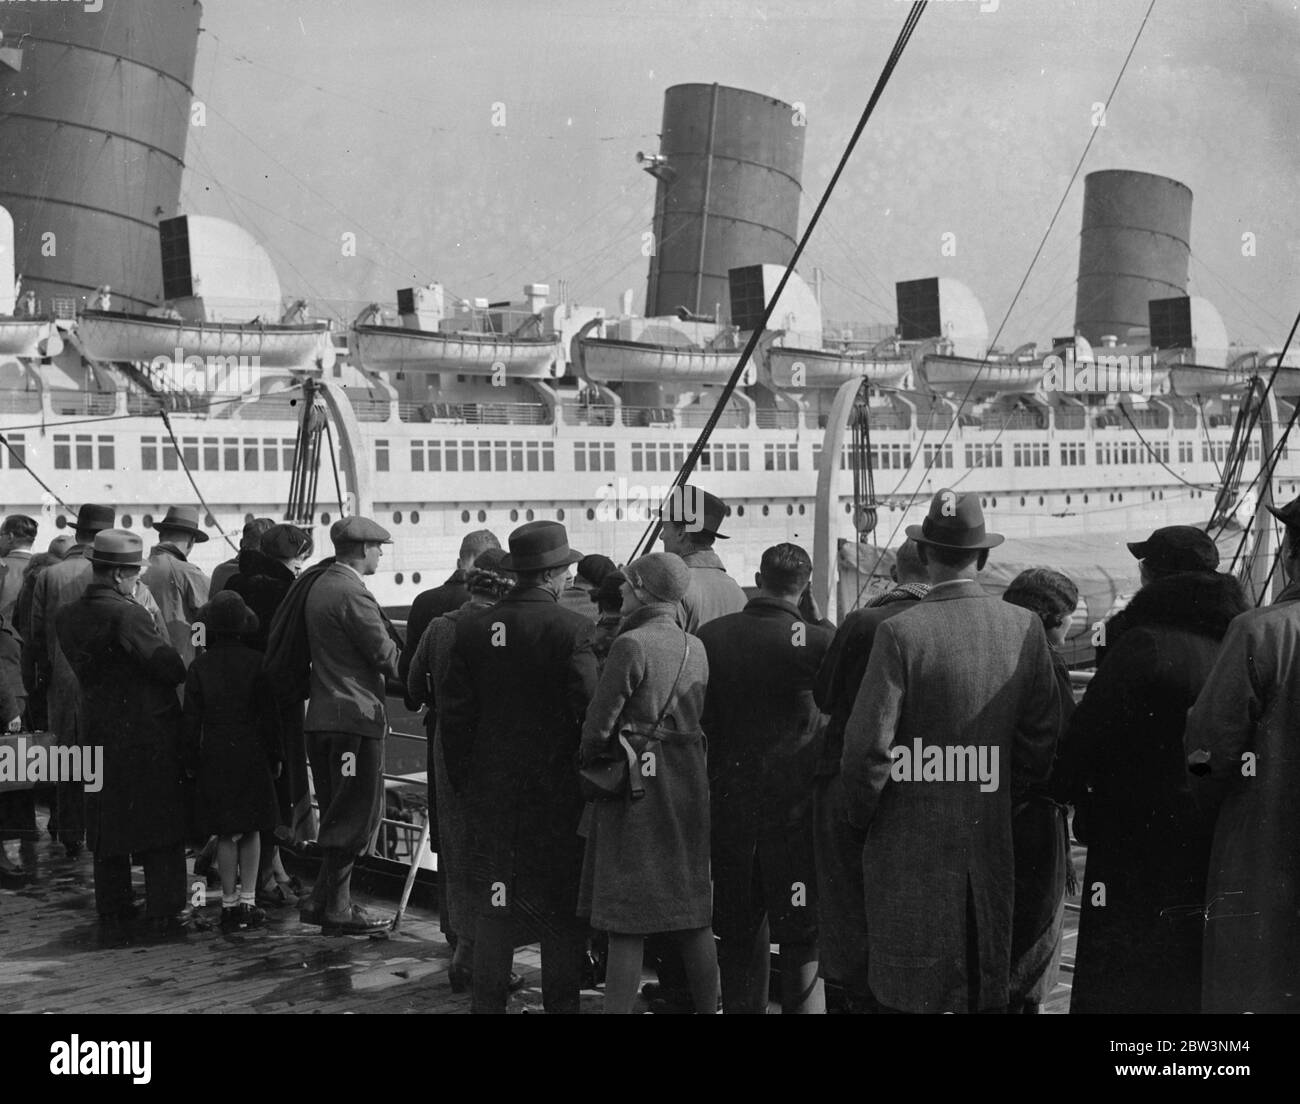 Queen Mary as Easter attraction . Thousands of Easter holidaymakers crowded pleasur steamers at Southampton in order to obtain a close up view of the ' Queen Mary ' as she lies in the Ocean Dock . Photo shows , viewing the ' Queen Mary ' from a pleaure steamer at Southampton . 13 April 1936 Stock Photo